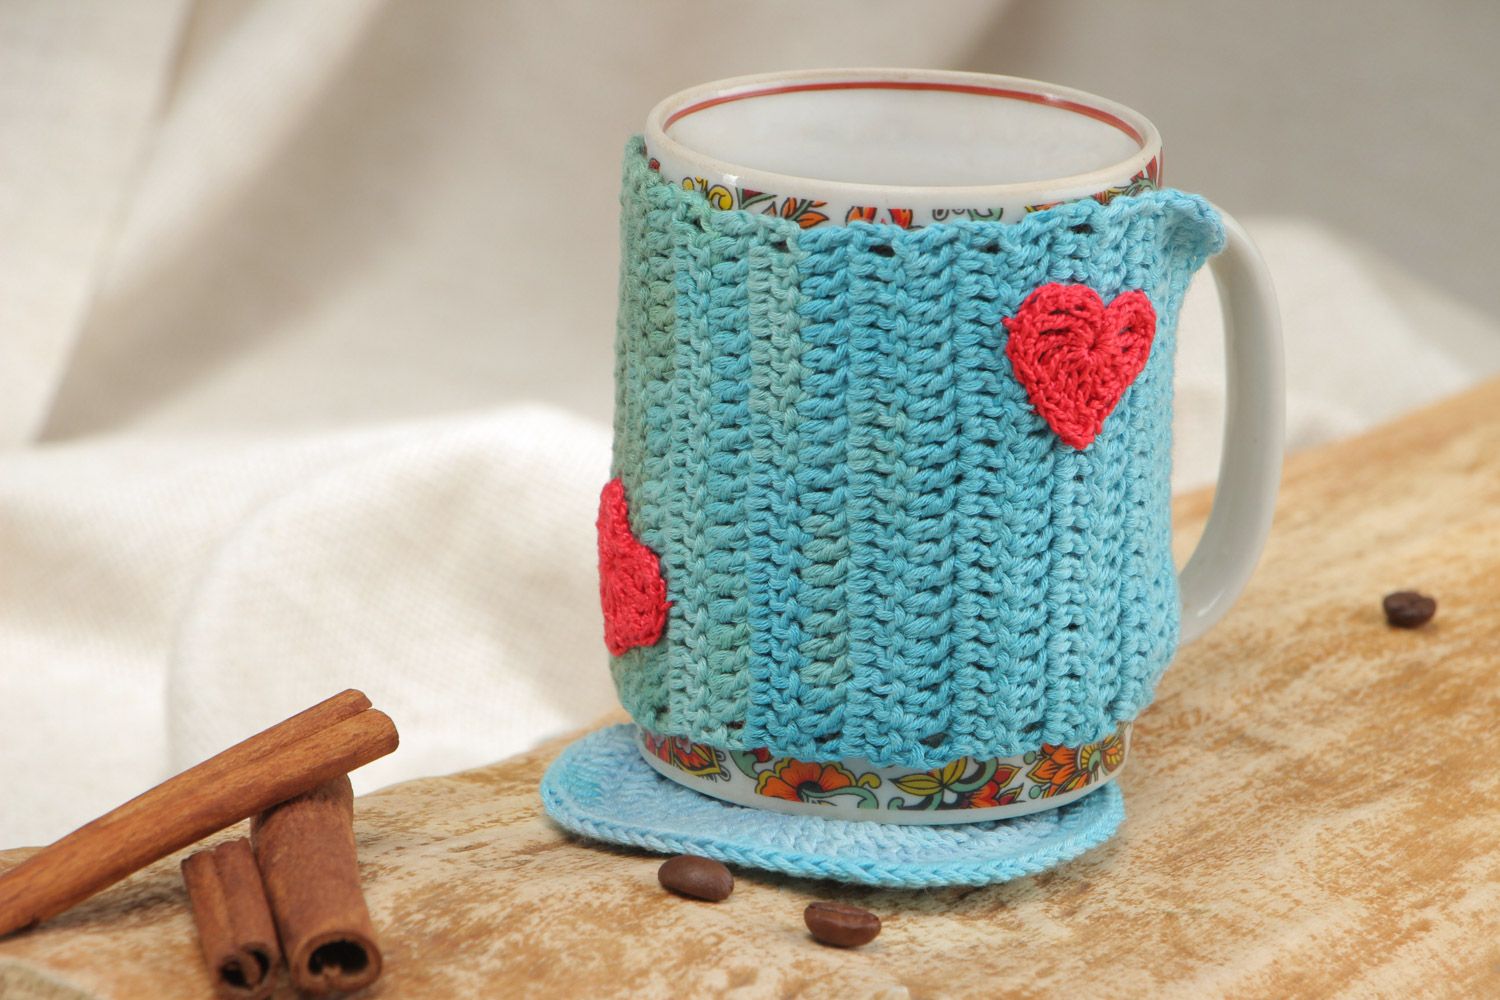 Handmade crochet cotton cup accessories set 2 items cup cozy and coaster photo 1